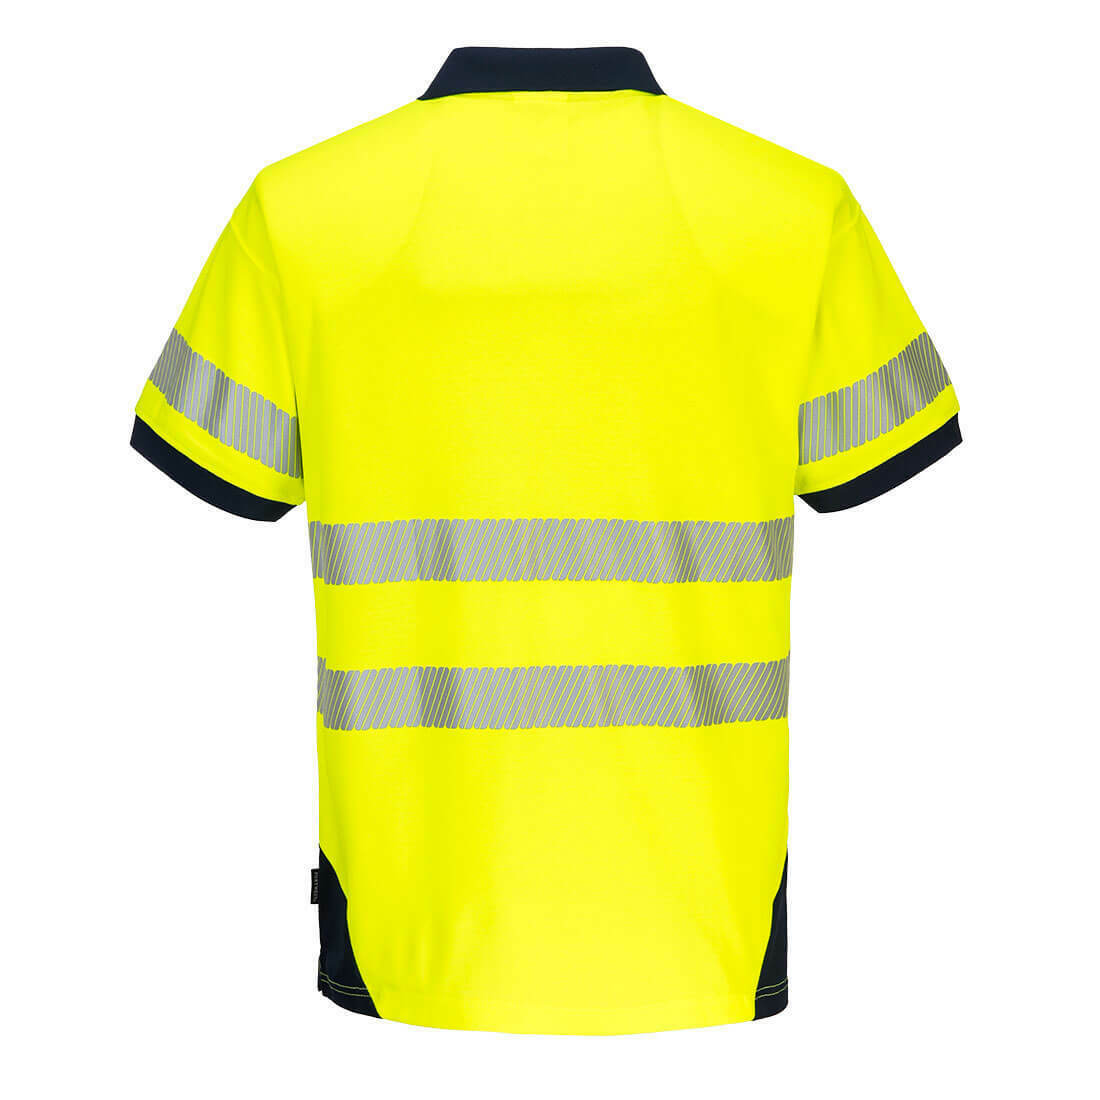 Portwest Mens PW3 Hi-Vis Polo Short Sleeve Cool Dry Comfy Taped Work Shirt T182